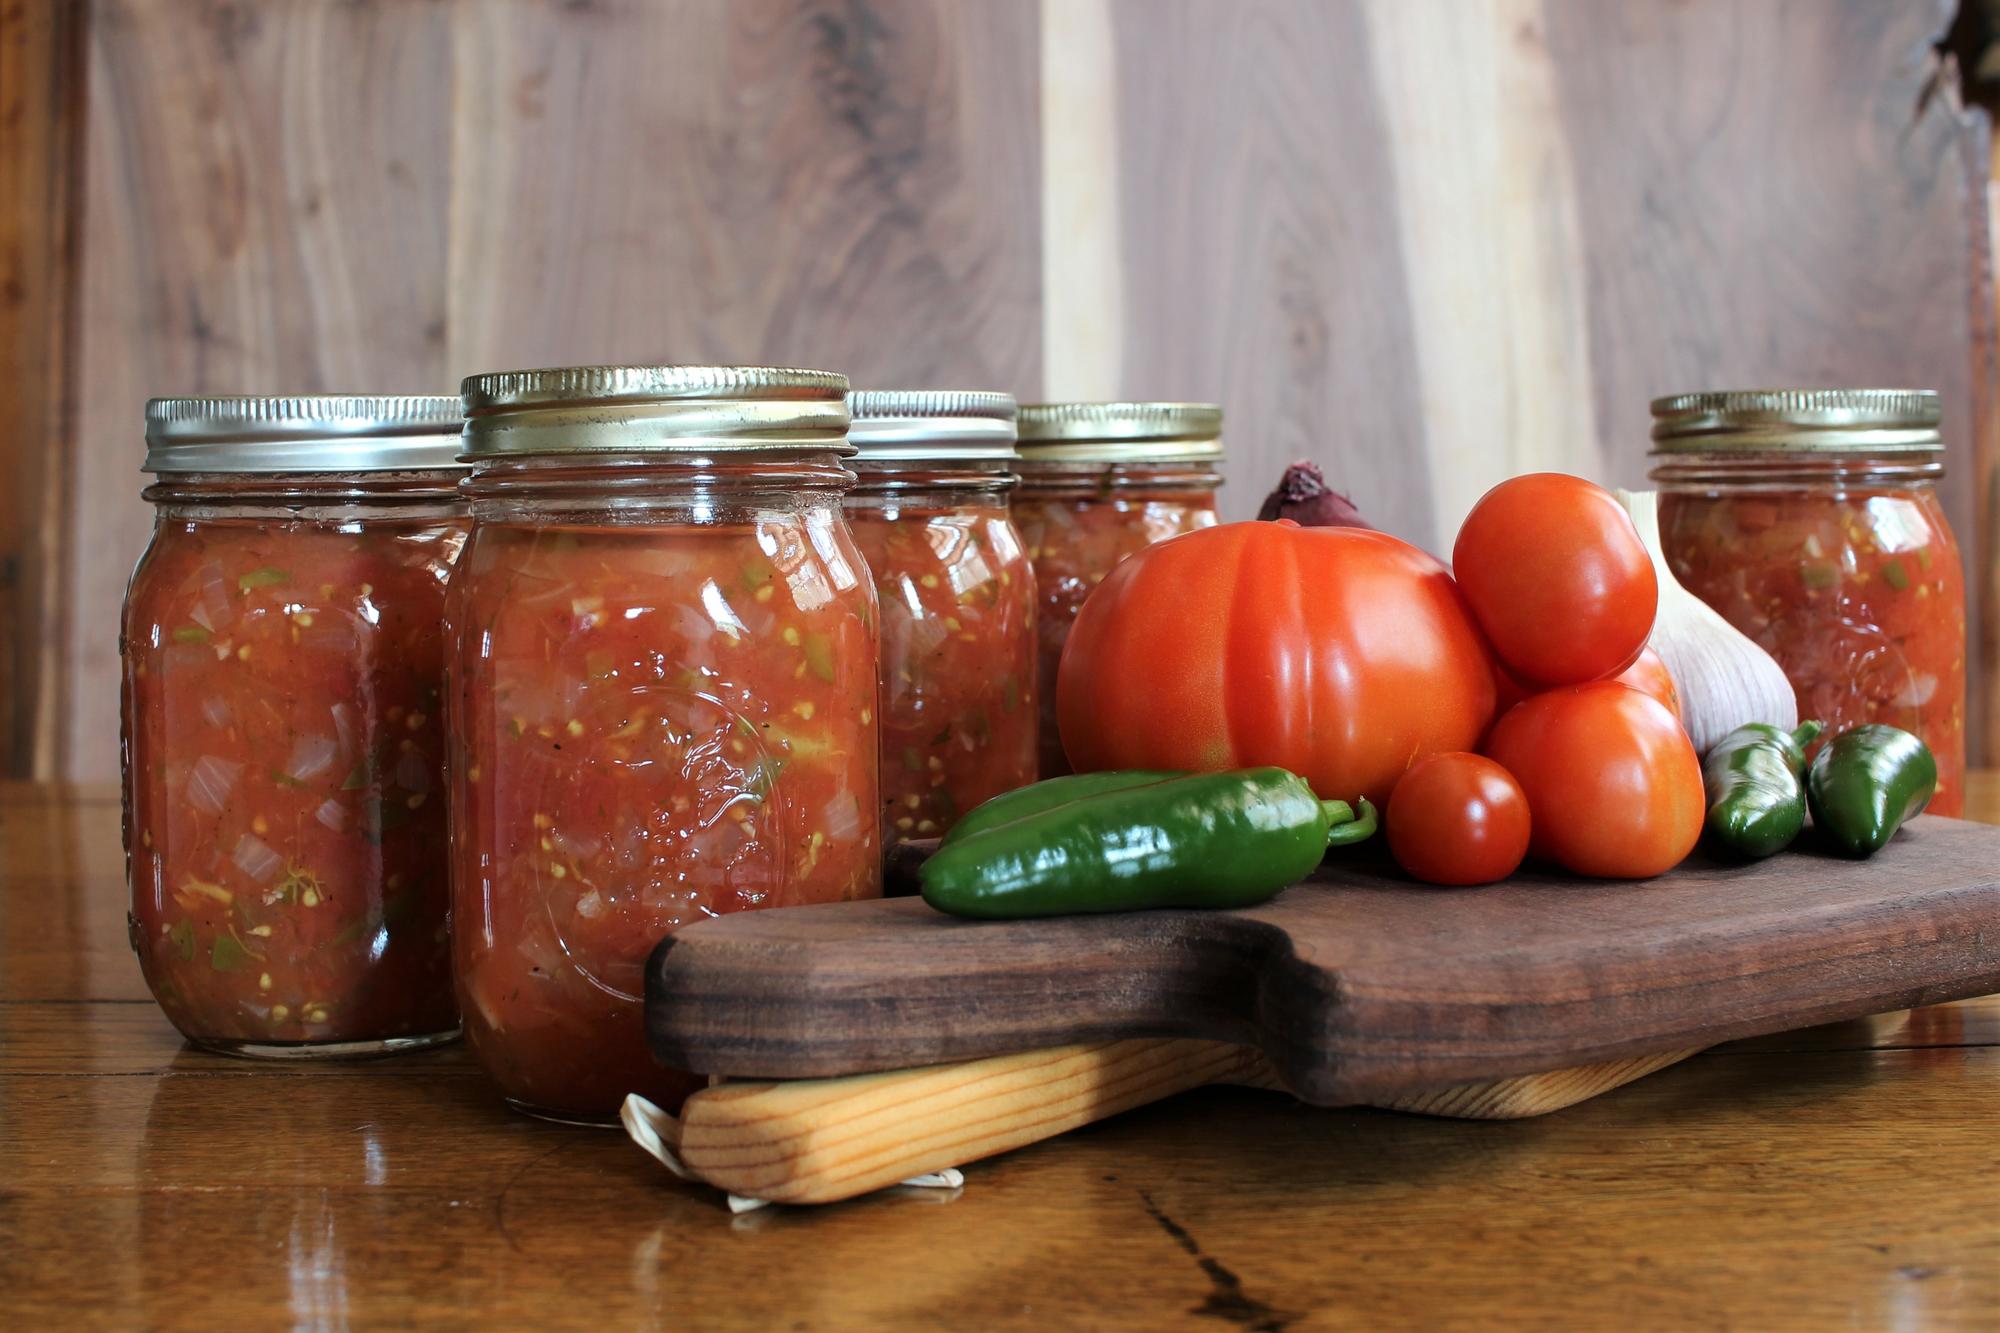 Tomatoes, peppers, and mason jars filled with home made salsa.